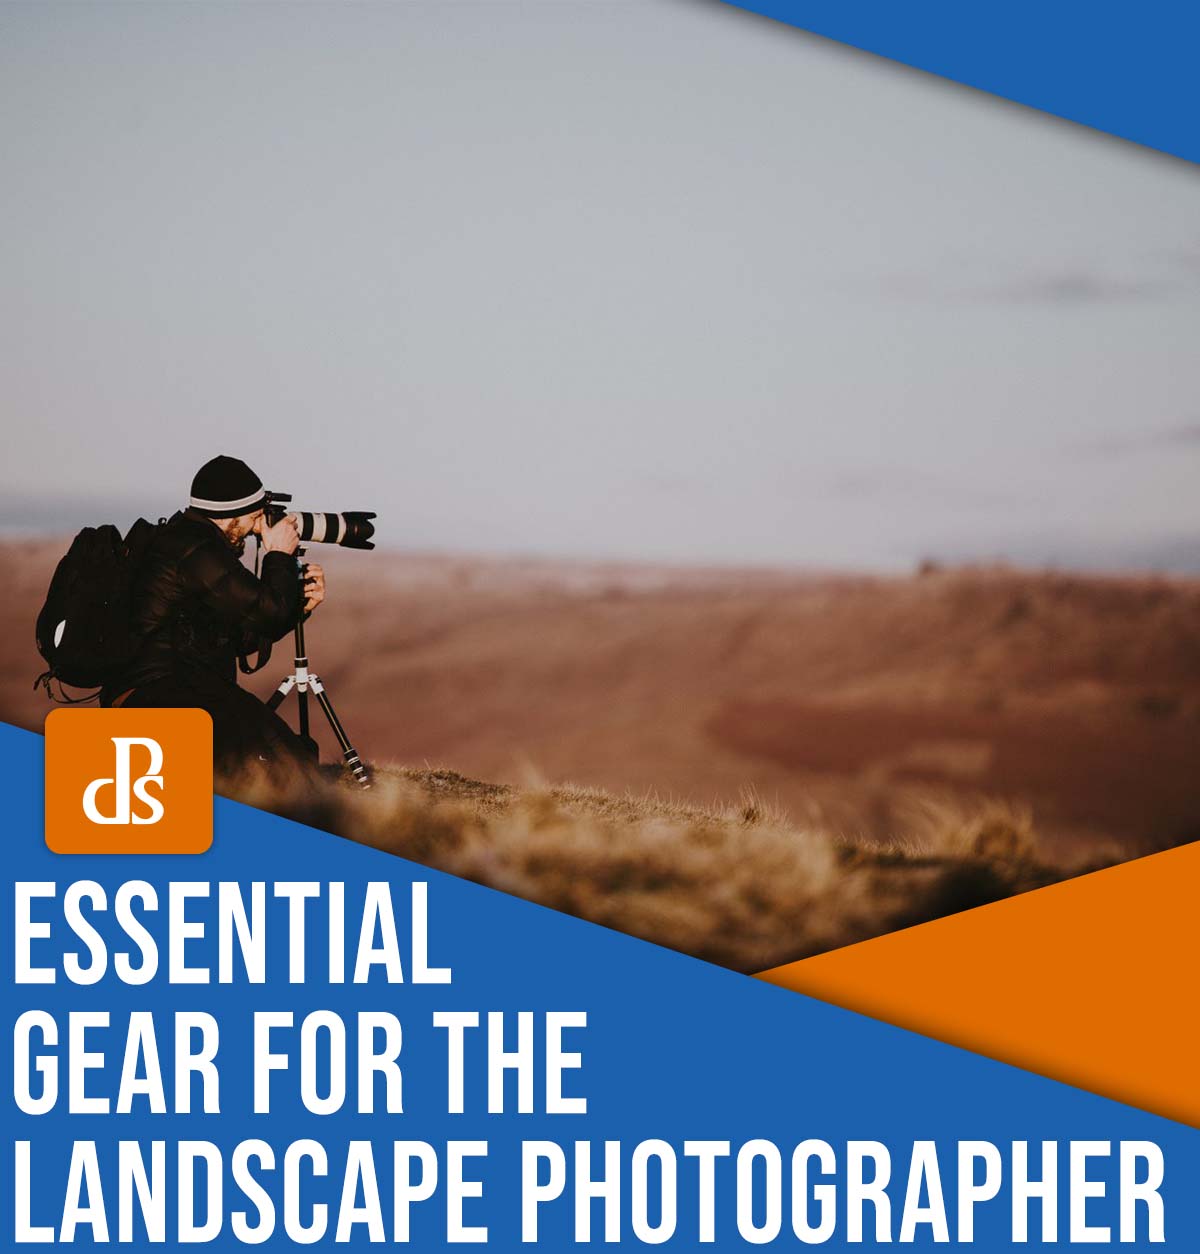 Essential gear for the landscape photographer